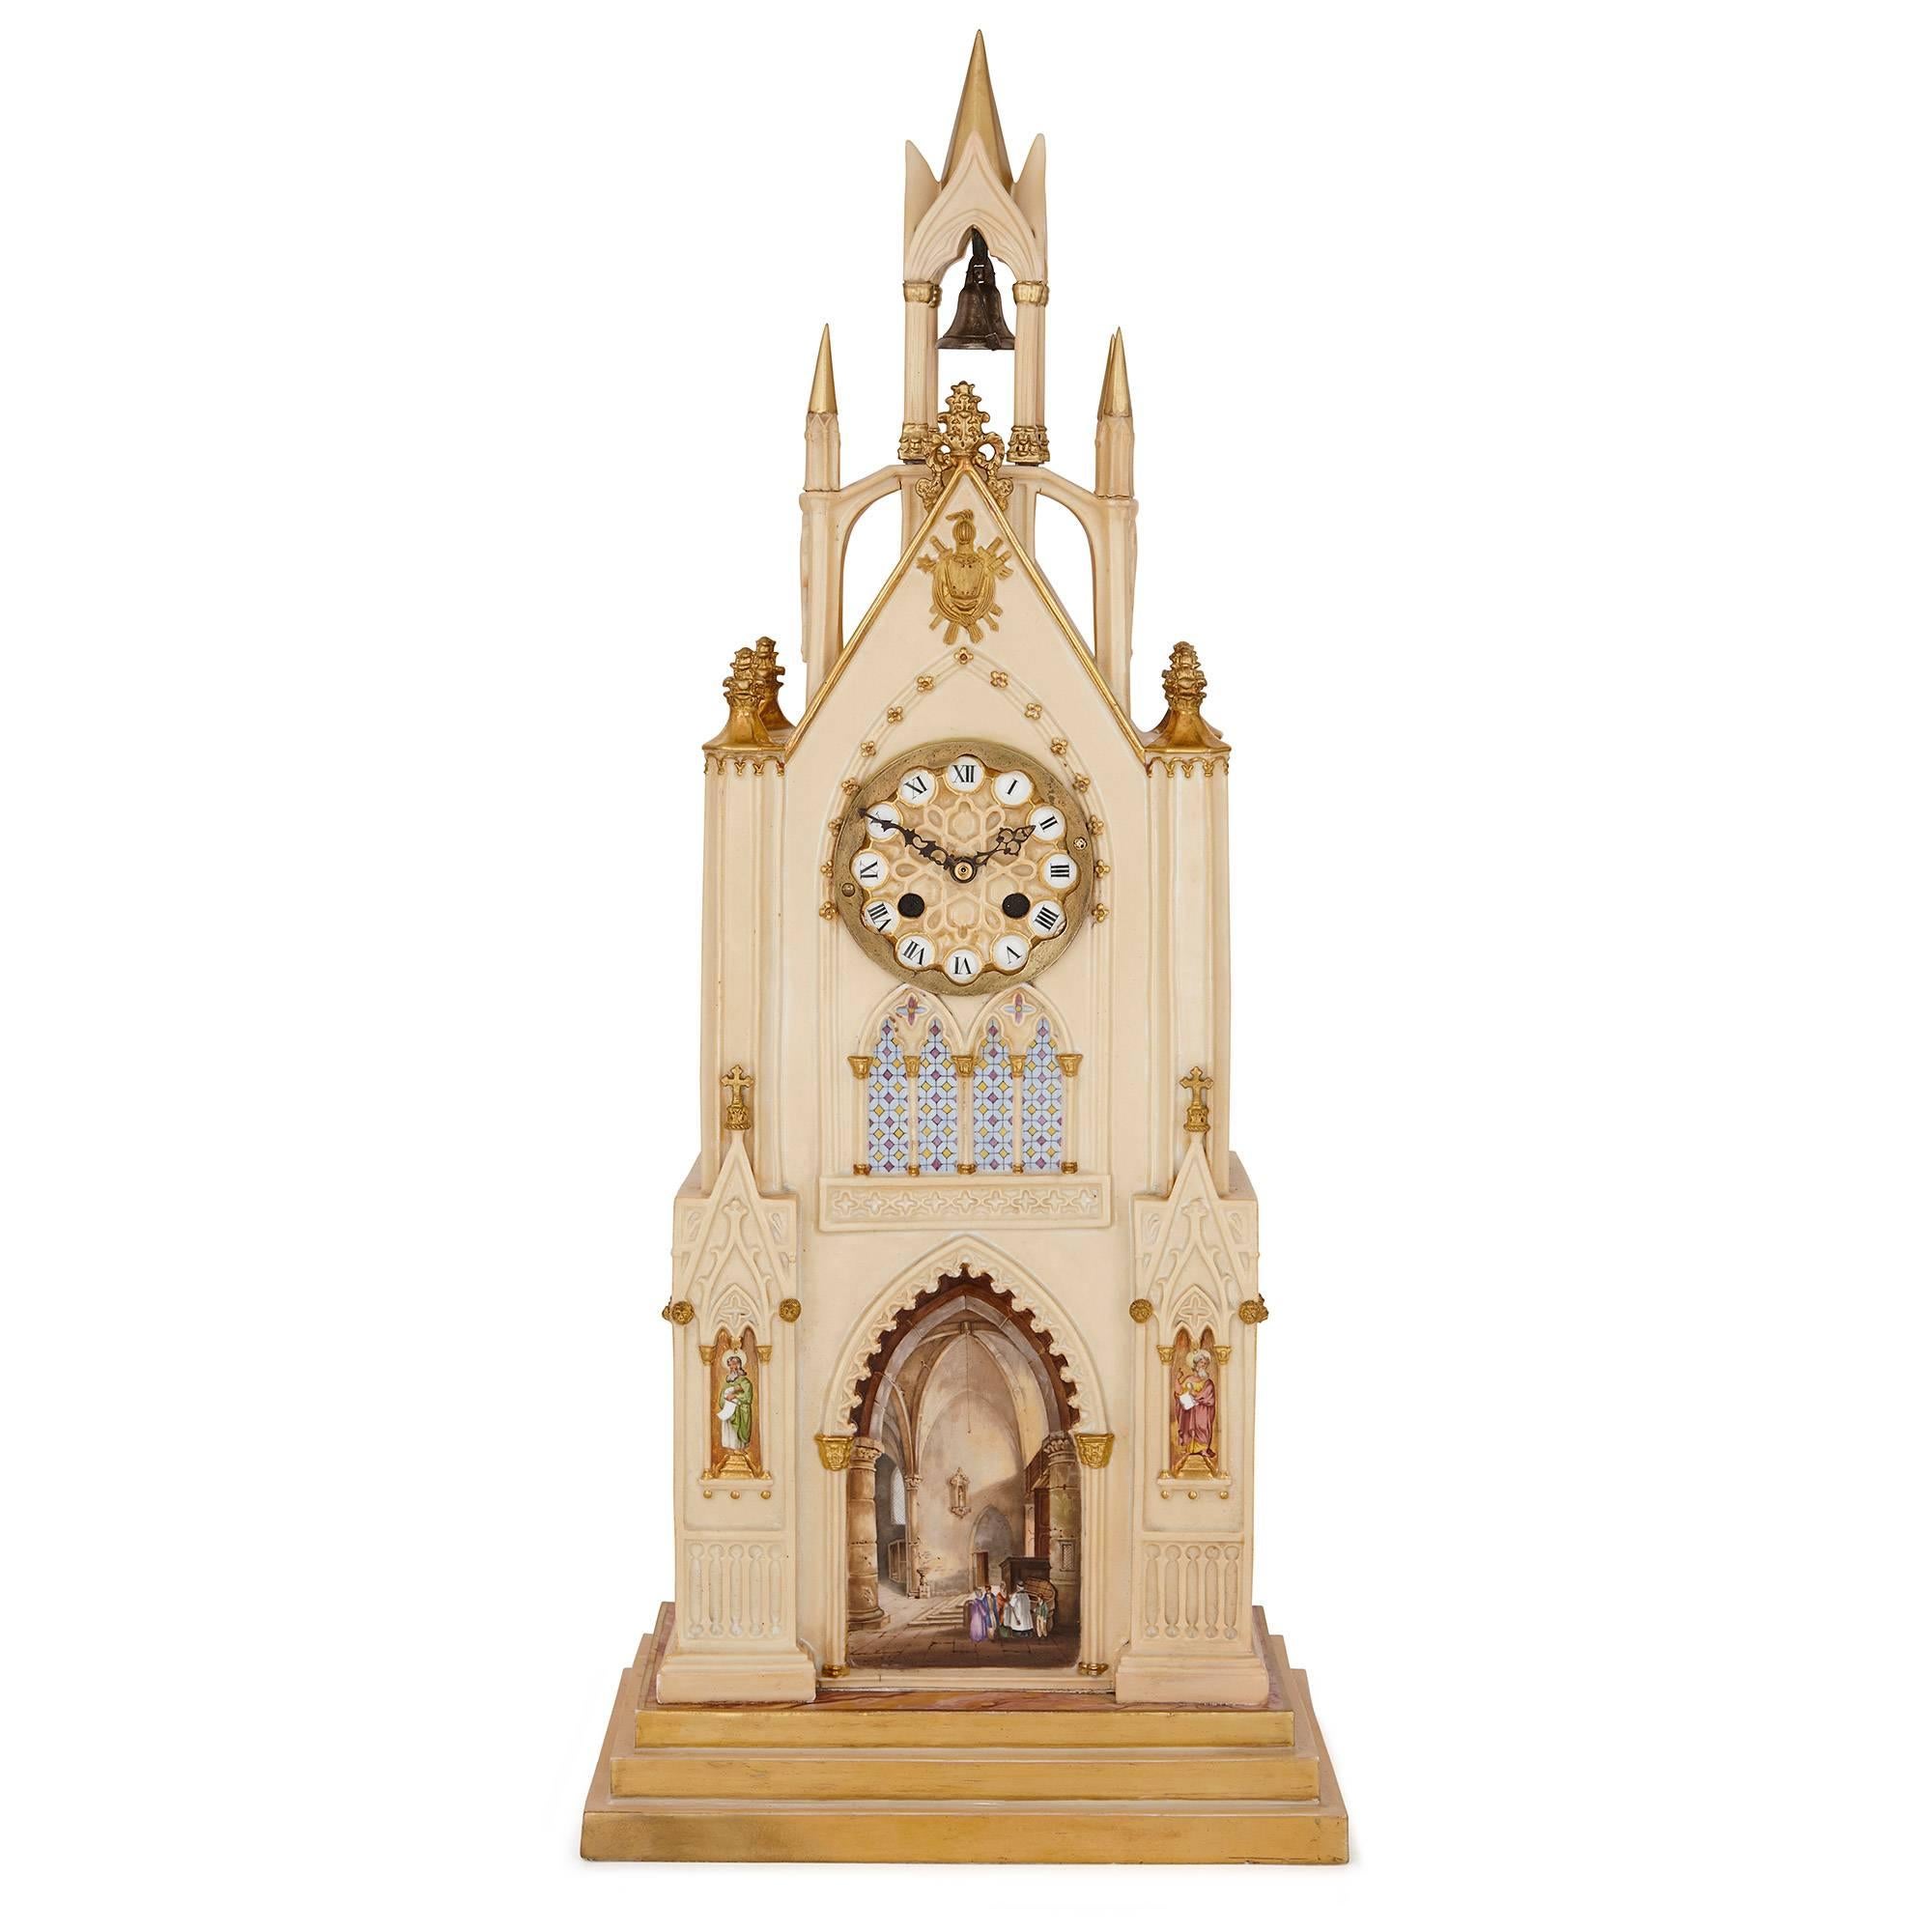 This beautiful Gothic Revival style porcelain clock was made by the prestigious French firm Dagoty and Honore, founded by the esteemed porcelain makers Pierre-Louis Dagoty and Edouard Honore. Dagoty and Honore's factory in Paris was highly regarded